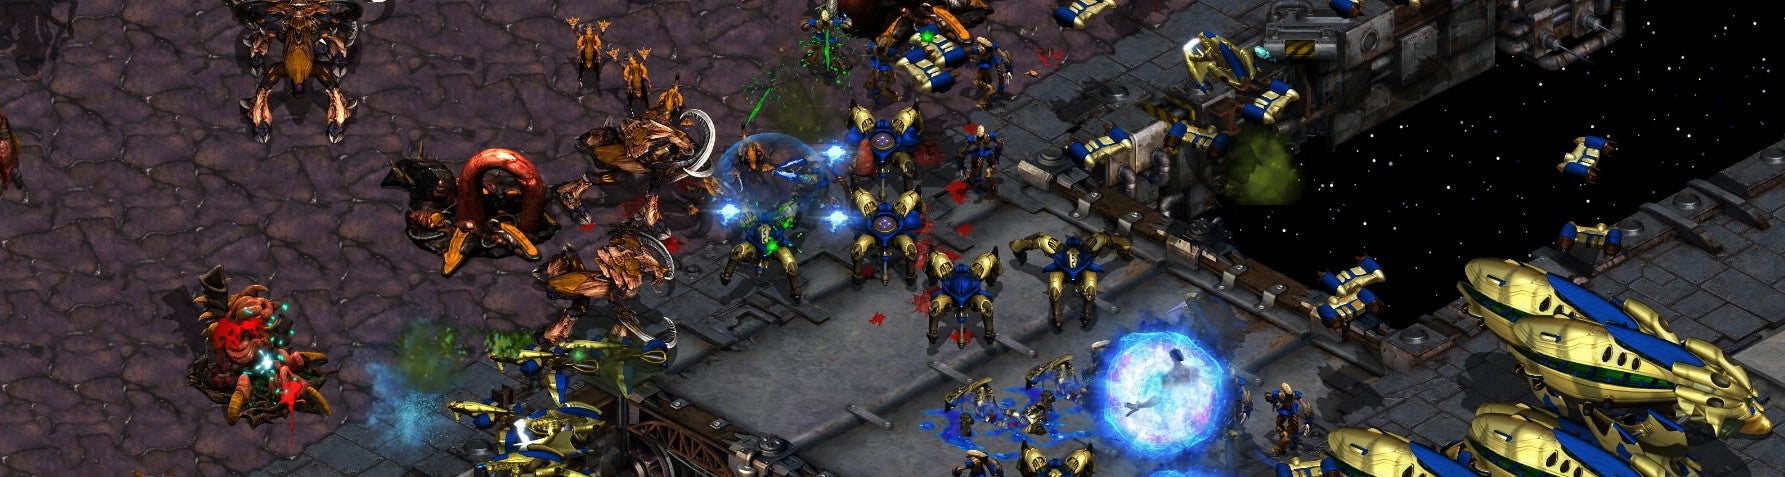 Image for StarCraft Remastered: Best Build Orders for the Terrans, Zerg, and Protoss